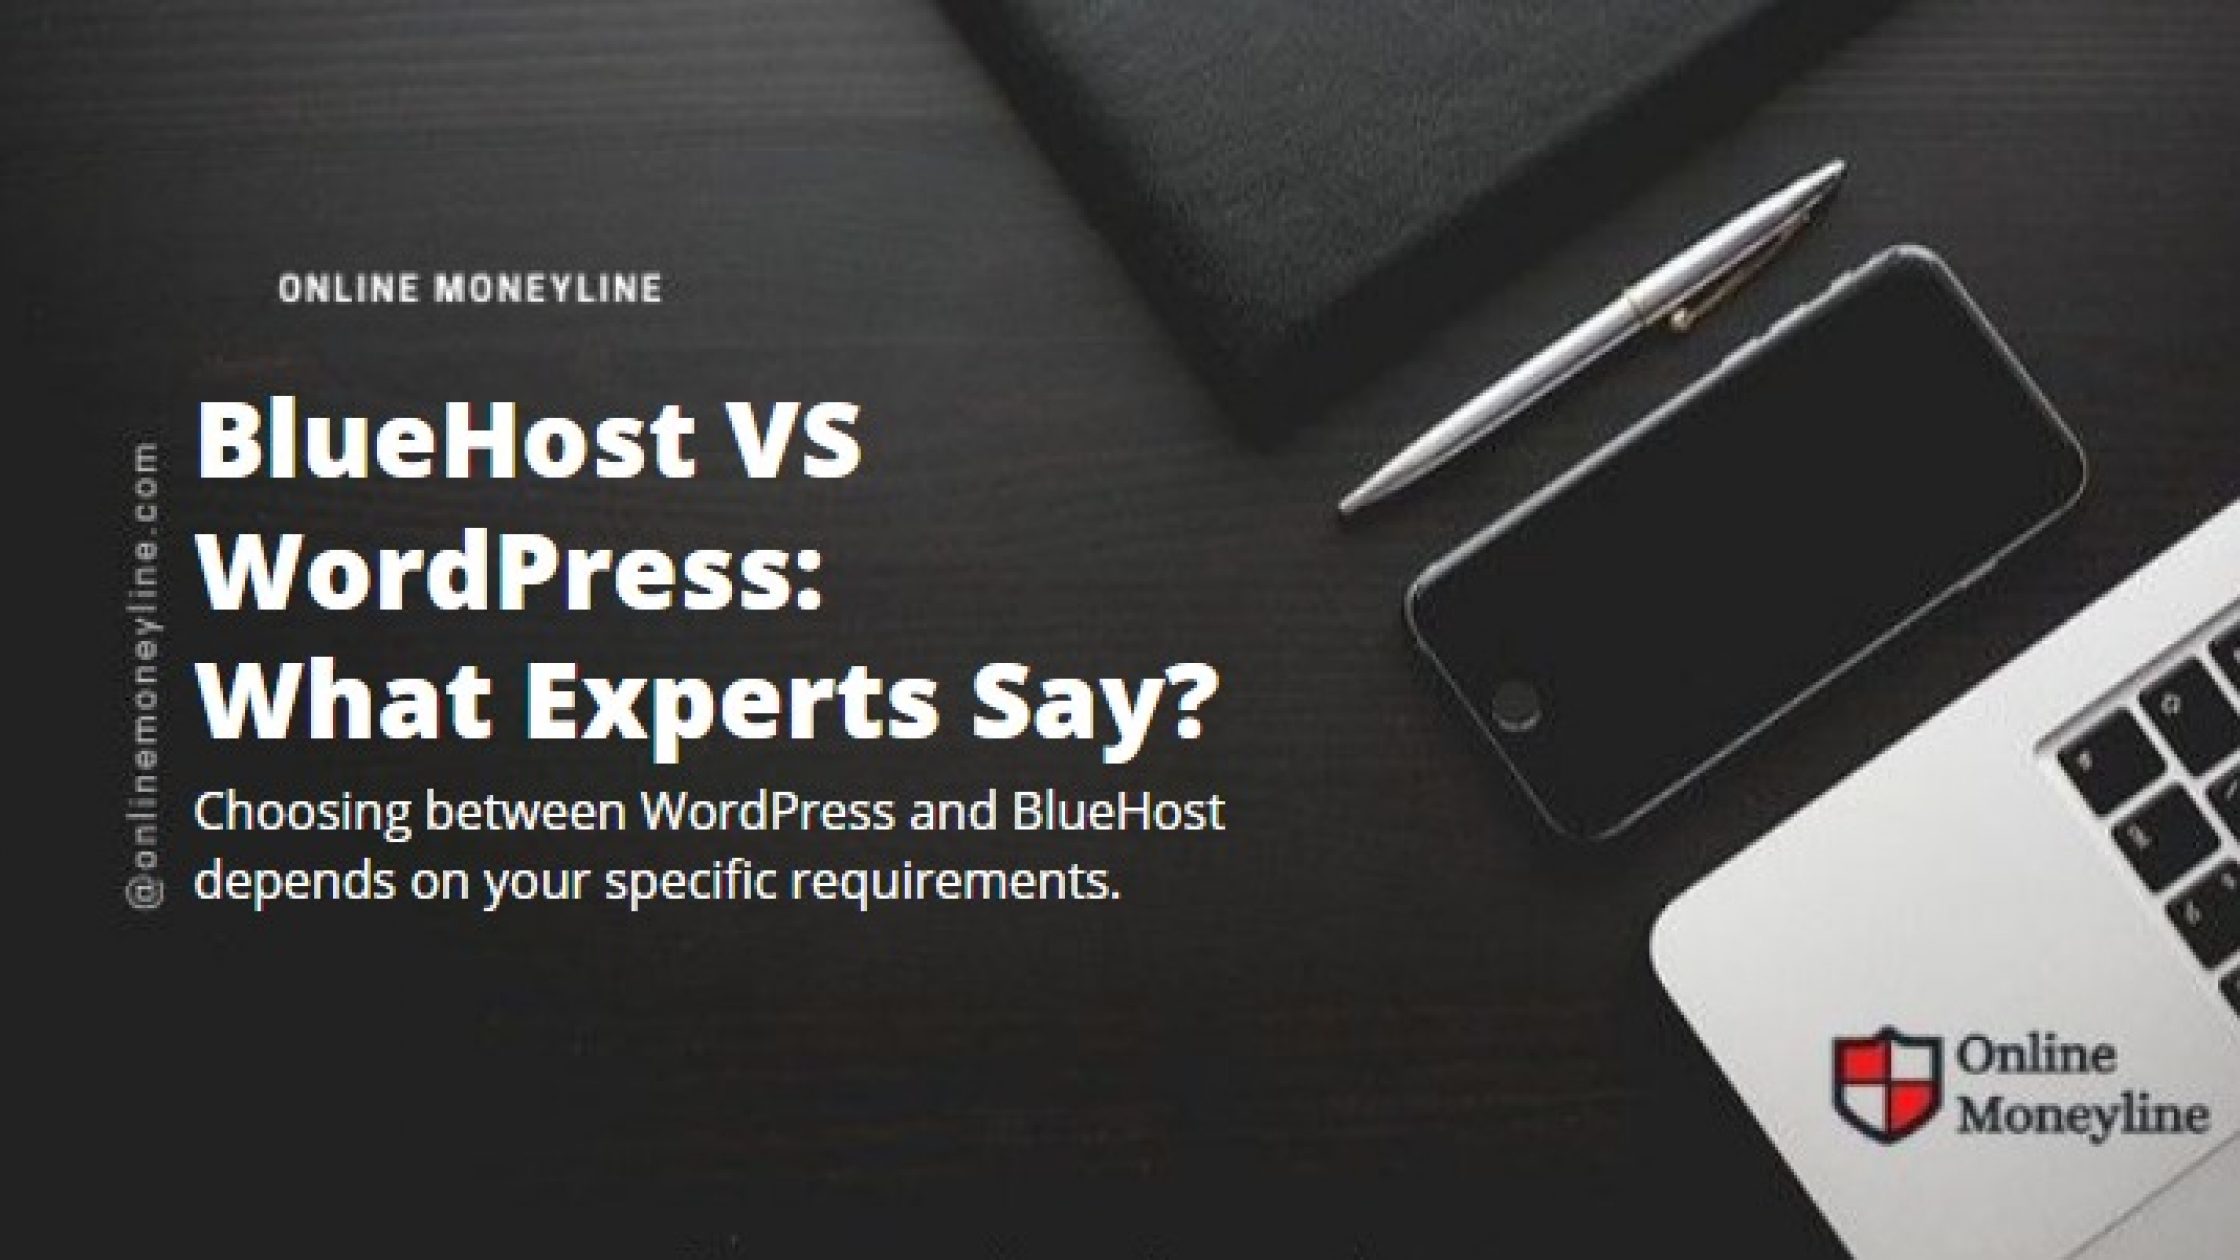 BlueHost VS WordPress: What Experts Say?